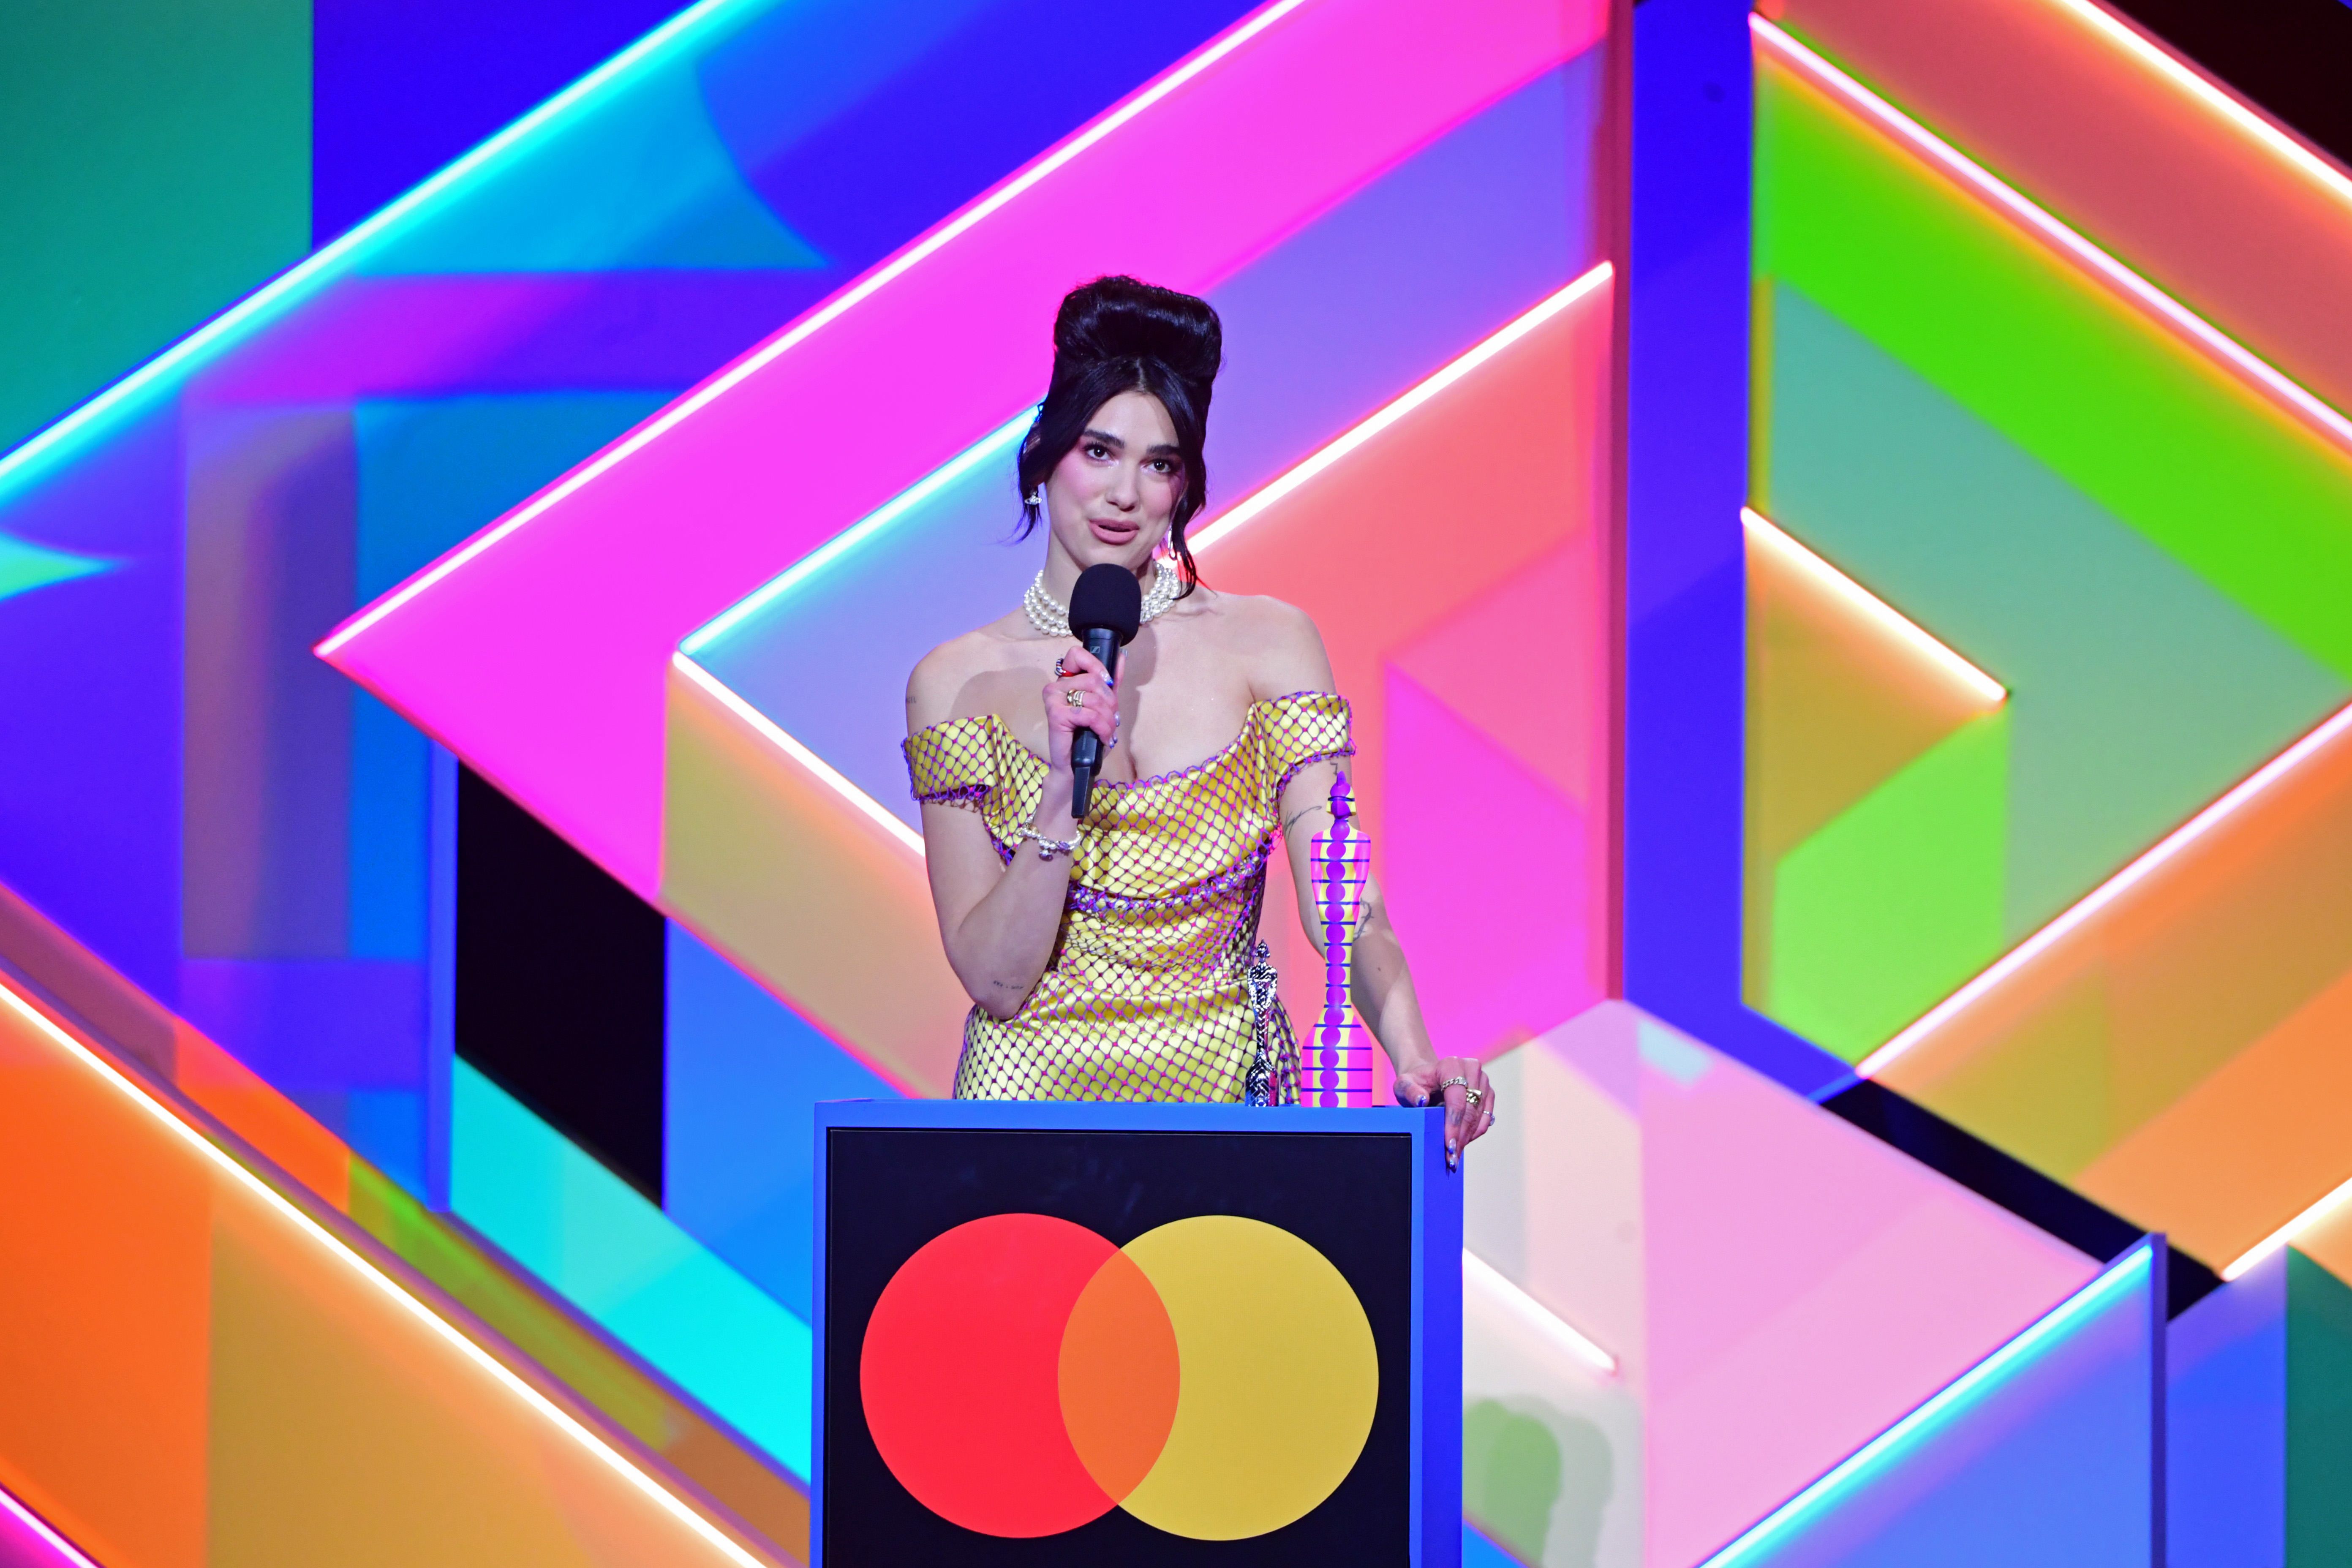 Dua Lipa accepts the award for Best Female Solo Artist at the Brit Awards